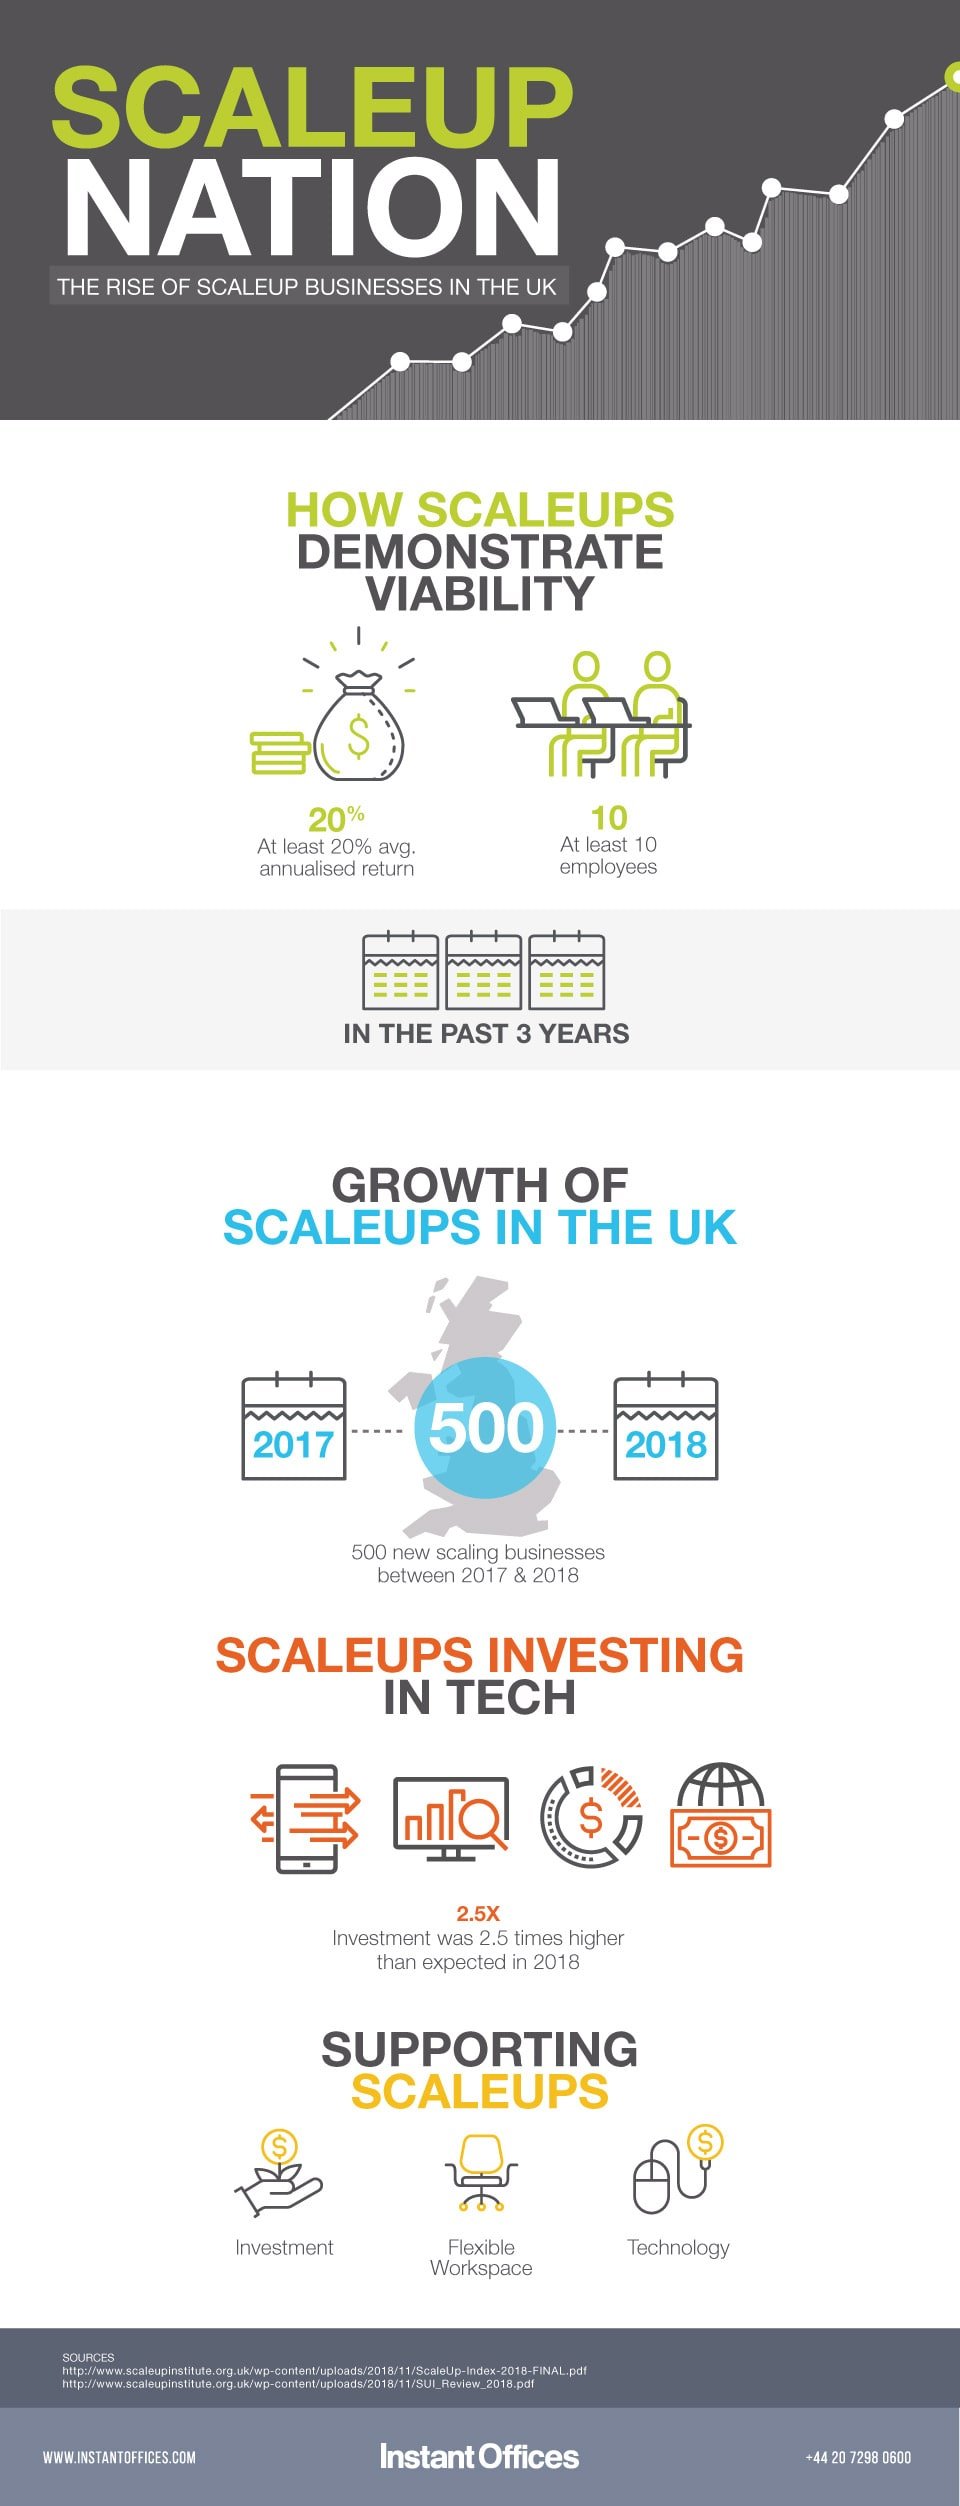 An infographic on scaleups and how flexible office space supports scaleups